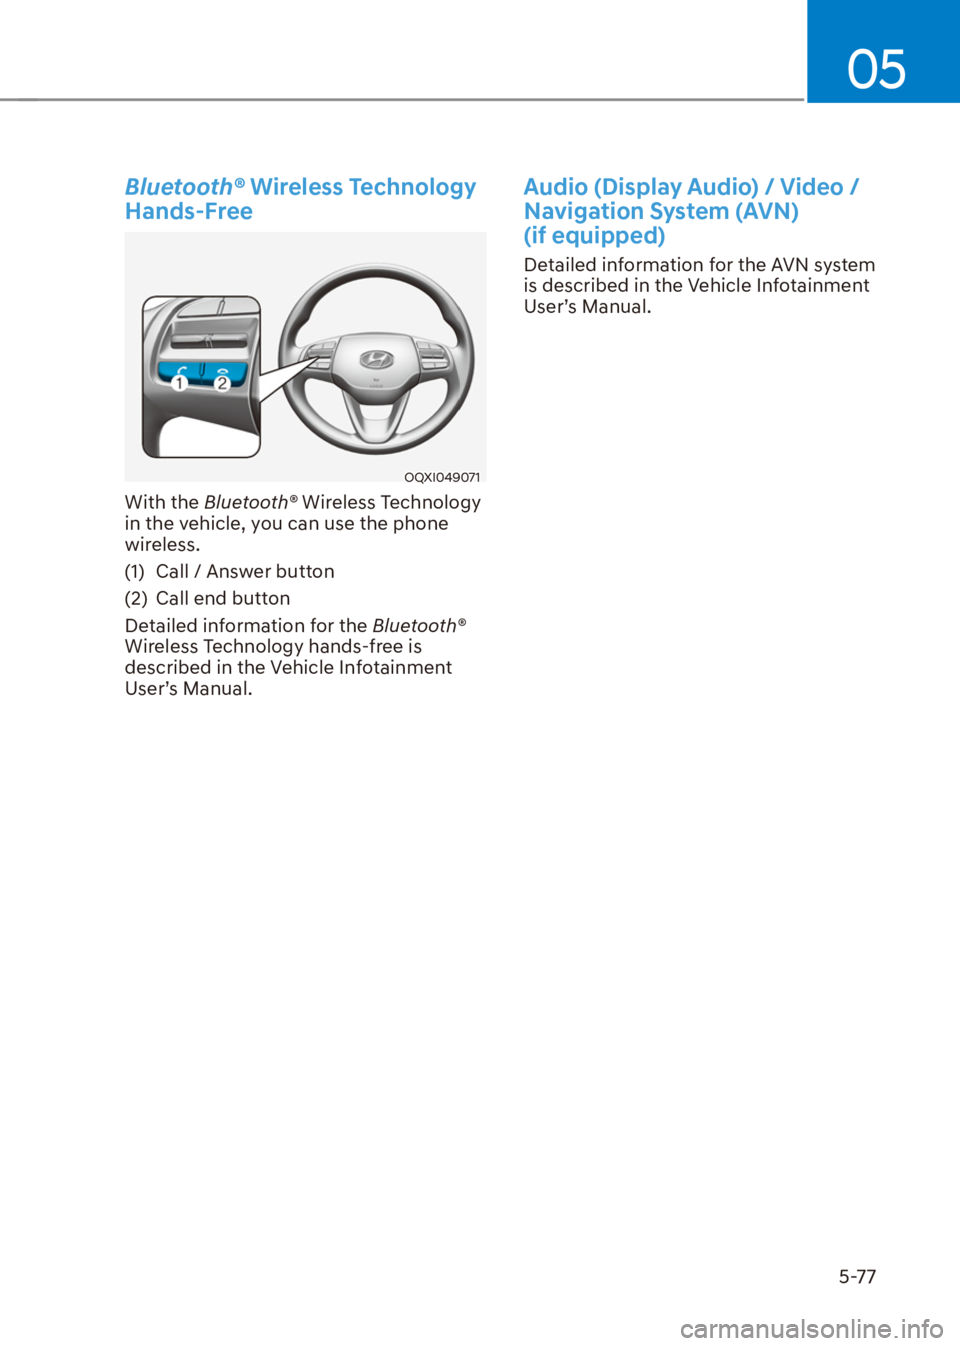 HYUNDAI VENUE 2021  Owners Manual 05
5-77
Bluetooth® Wireless Technology 
Hands-Free
OQXI049071
With the Bluetooth® Wireless Technology 
in the vehicle, you can use the phone 
wireless.
(1)  Call / Answer button
(2)  Call end button